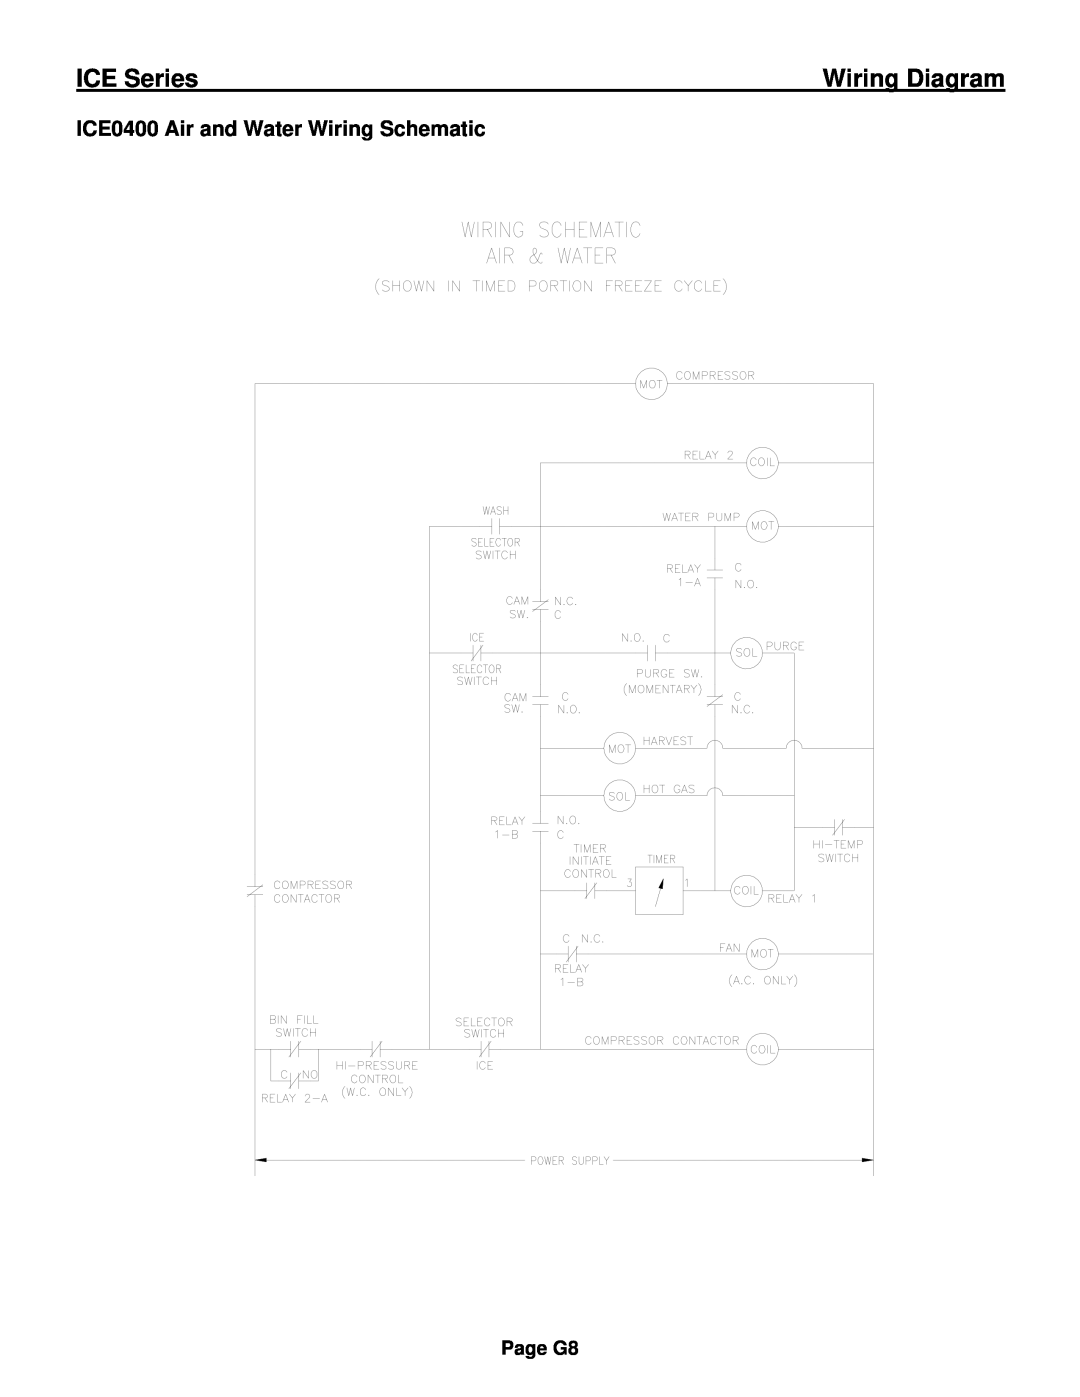 Ice-O-Matic ICE0250 Series installation manual ICE0400 Air and Water Wiring Schematic, ICE Series, Wiring Diagram, Page G8 